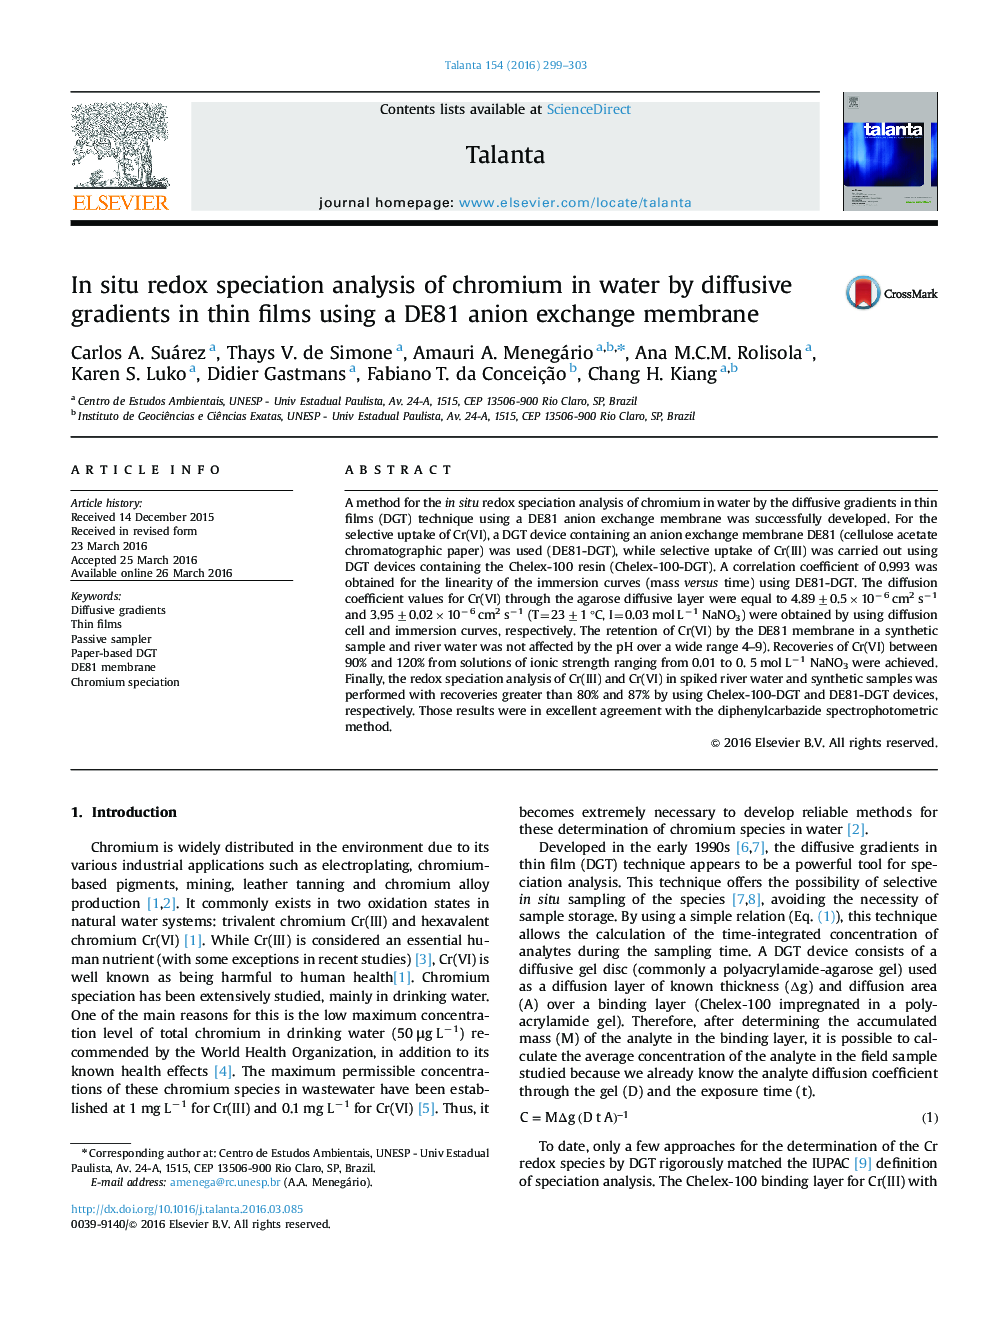 In situ redox speciation analysis of chromium in water by diffusive gradients in thin films using a DE81 anion exchange membrane